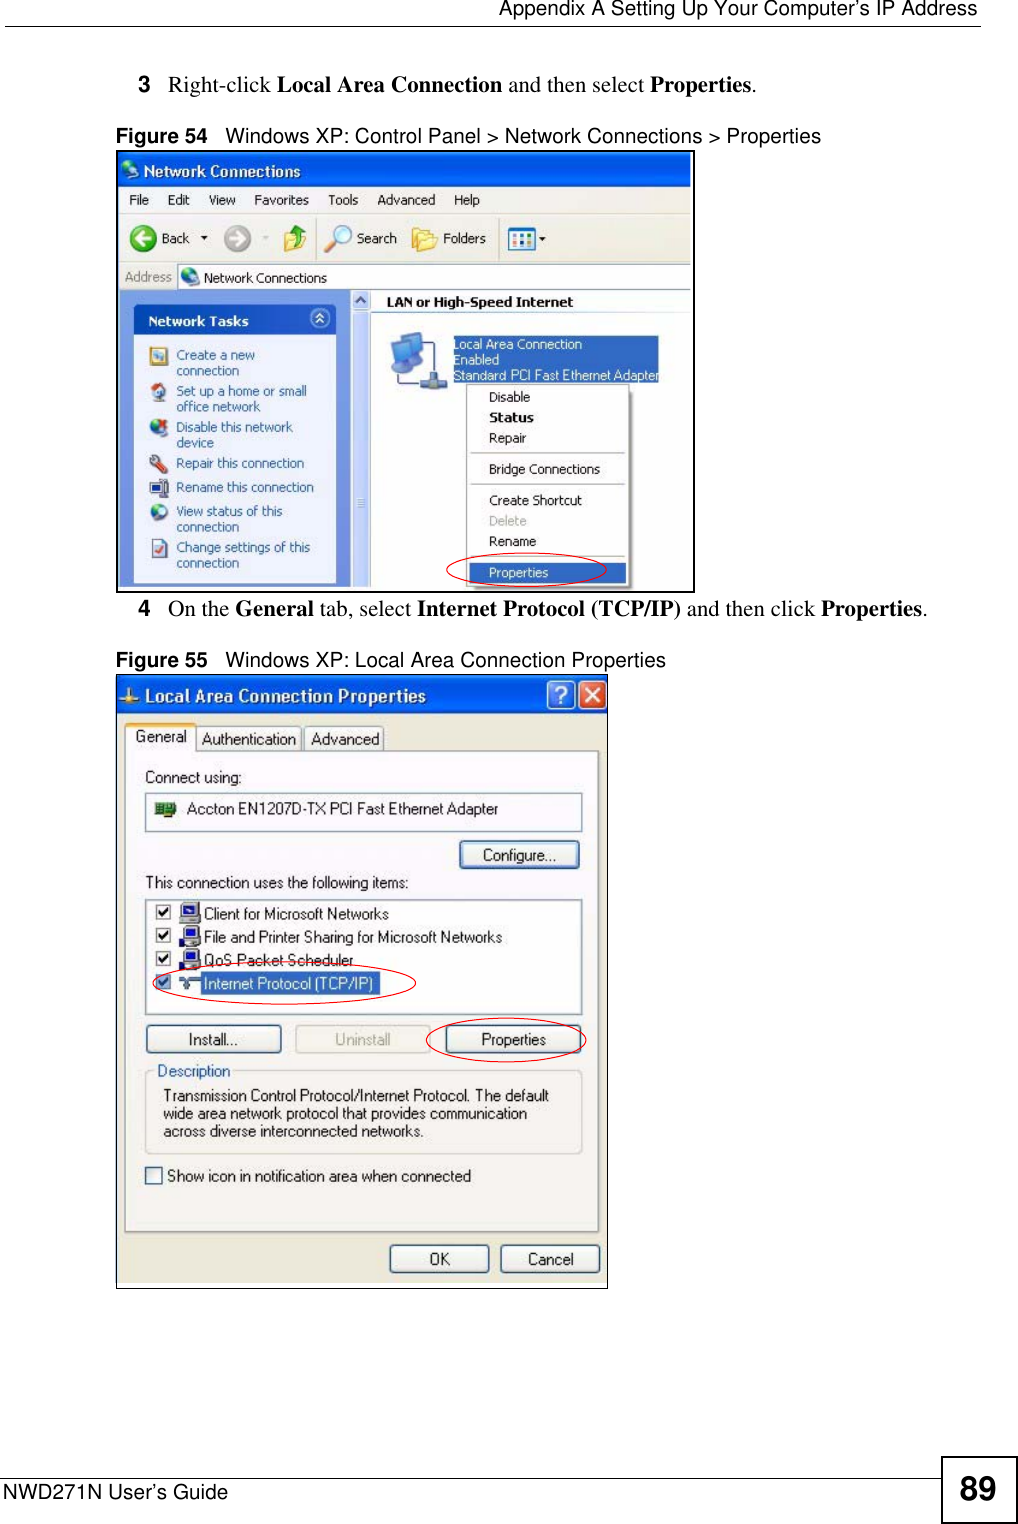  Appendix A Setting Up Your Computer’s IP AddressNWD271N User’s Guide 893Right-click Local Area Connection and then select Properties.Figure 54   Windows XP: Control Panel &gt; Network Connections &gt; Properties4On the General tab, select Internet Protocol (TCP/IP) and then click Properties.Figure 55   Windows XP: Local Area Connection Properties